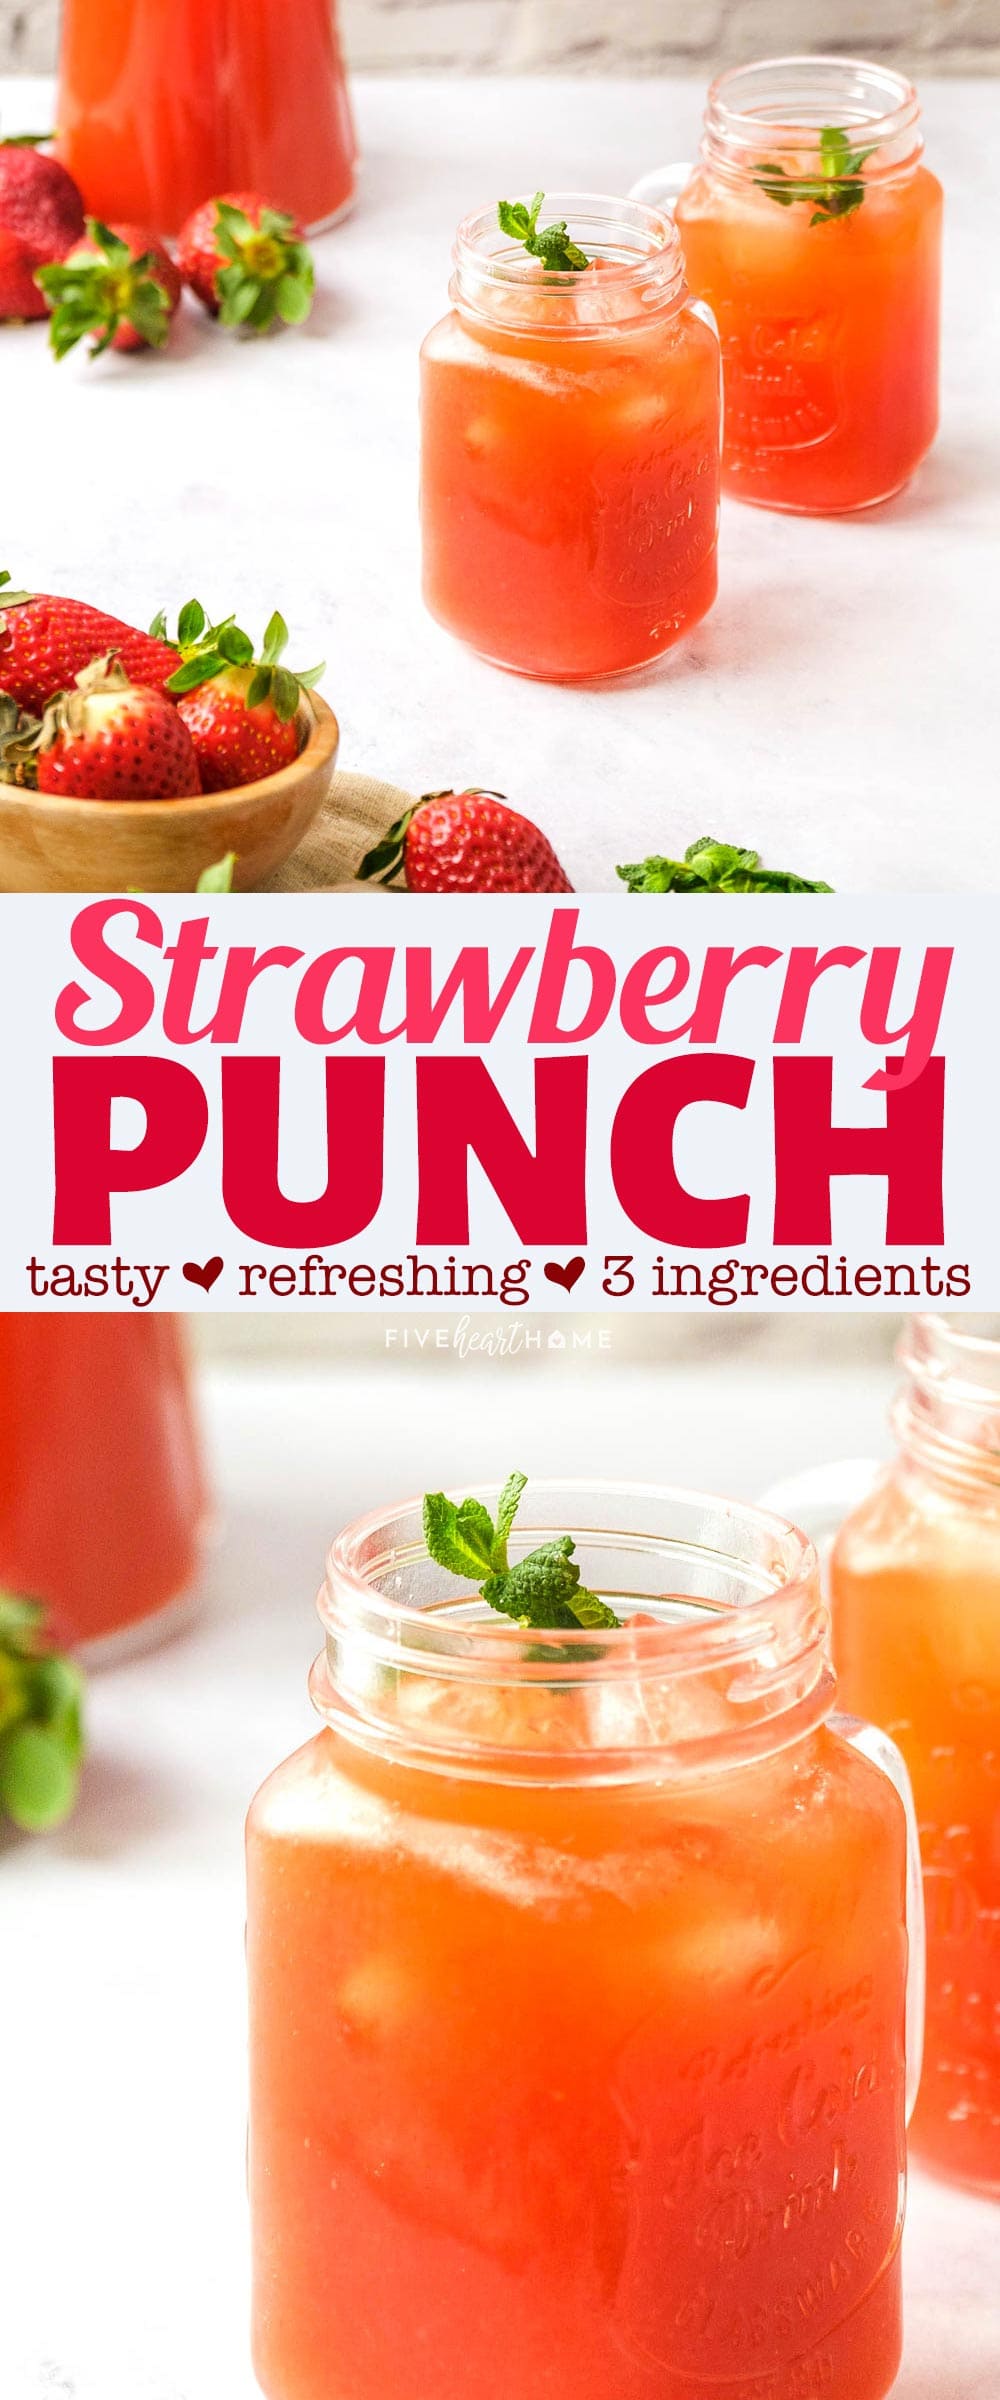 Sparkling Strawberry Punch ~ this simple, refreshing, delicious summer drink combines just THREE simple ingredients, making it the perfect beverage to serve at showers, BBQs, parties, poolside, or any time you need to quench your summertime thirst! | FiveHeartHome.com via @fivehearthome